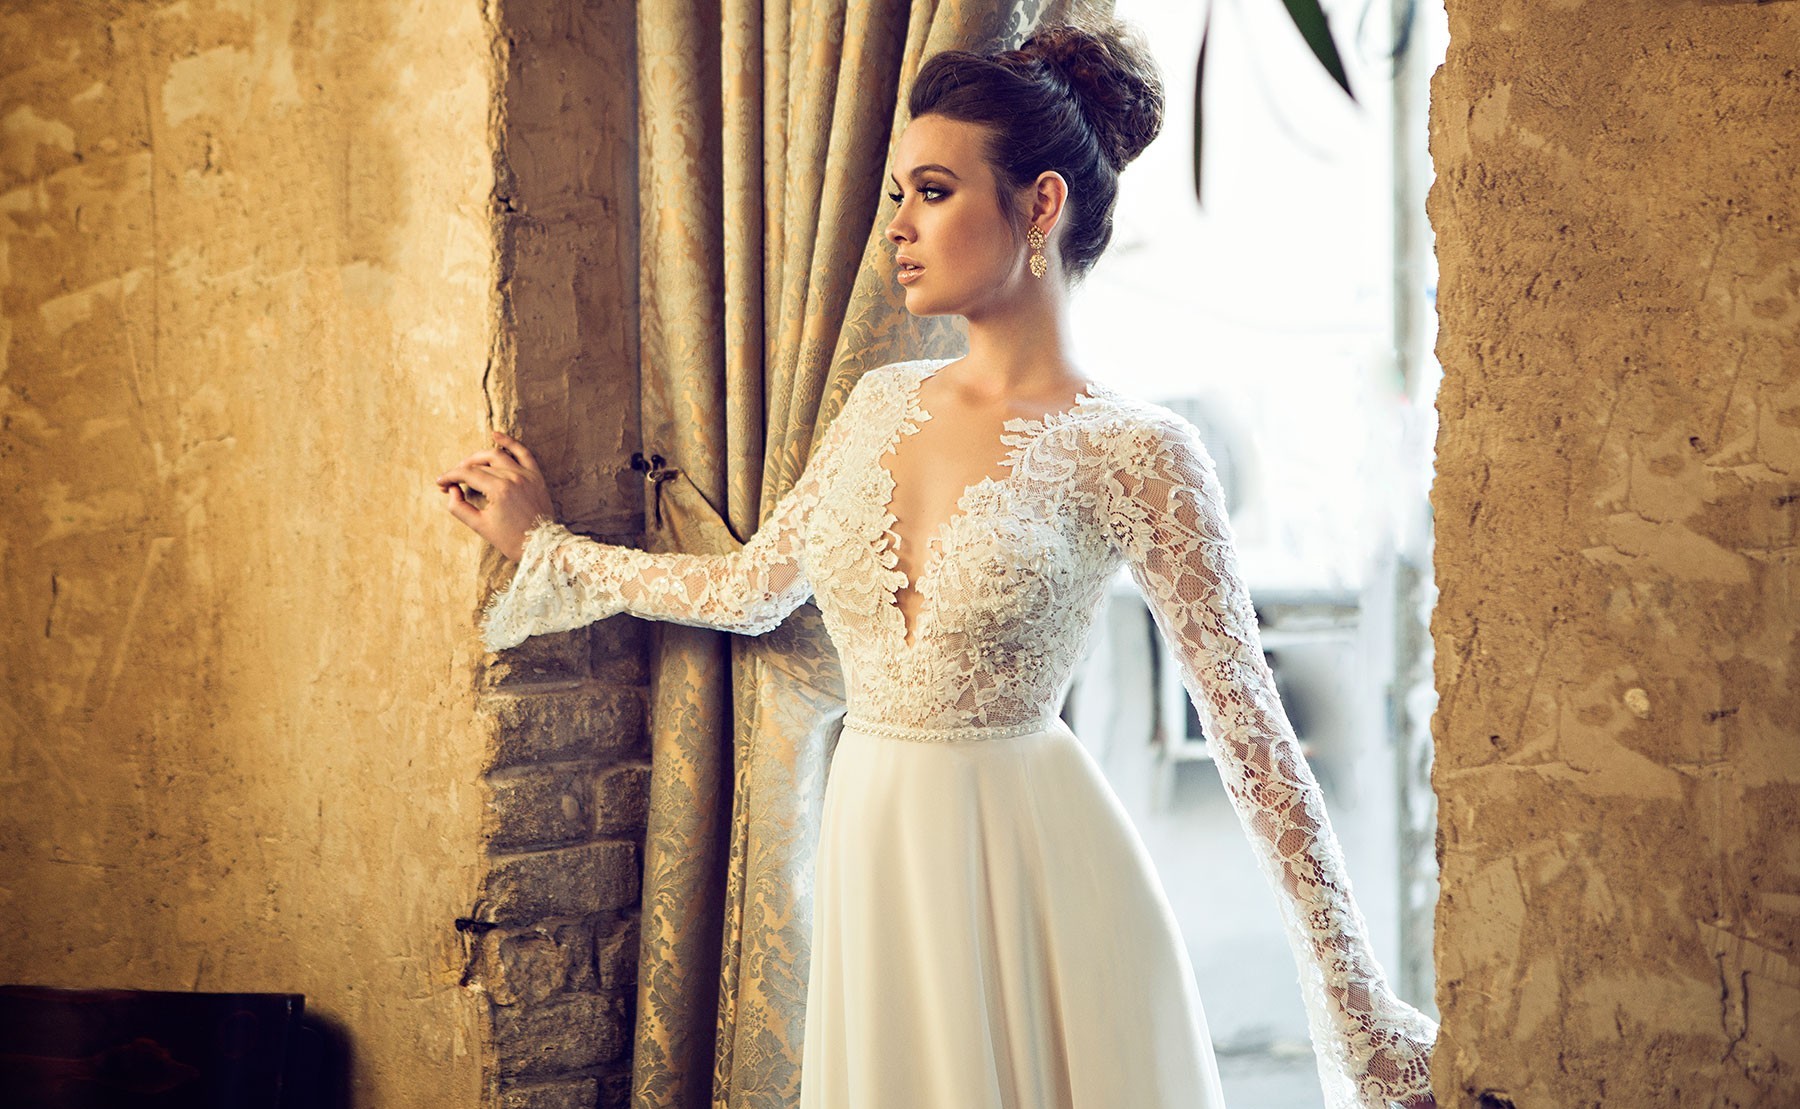  Best Long Sleeve Wedding Dresses  Check it out now 